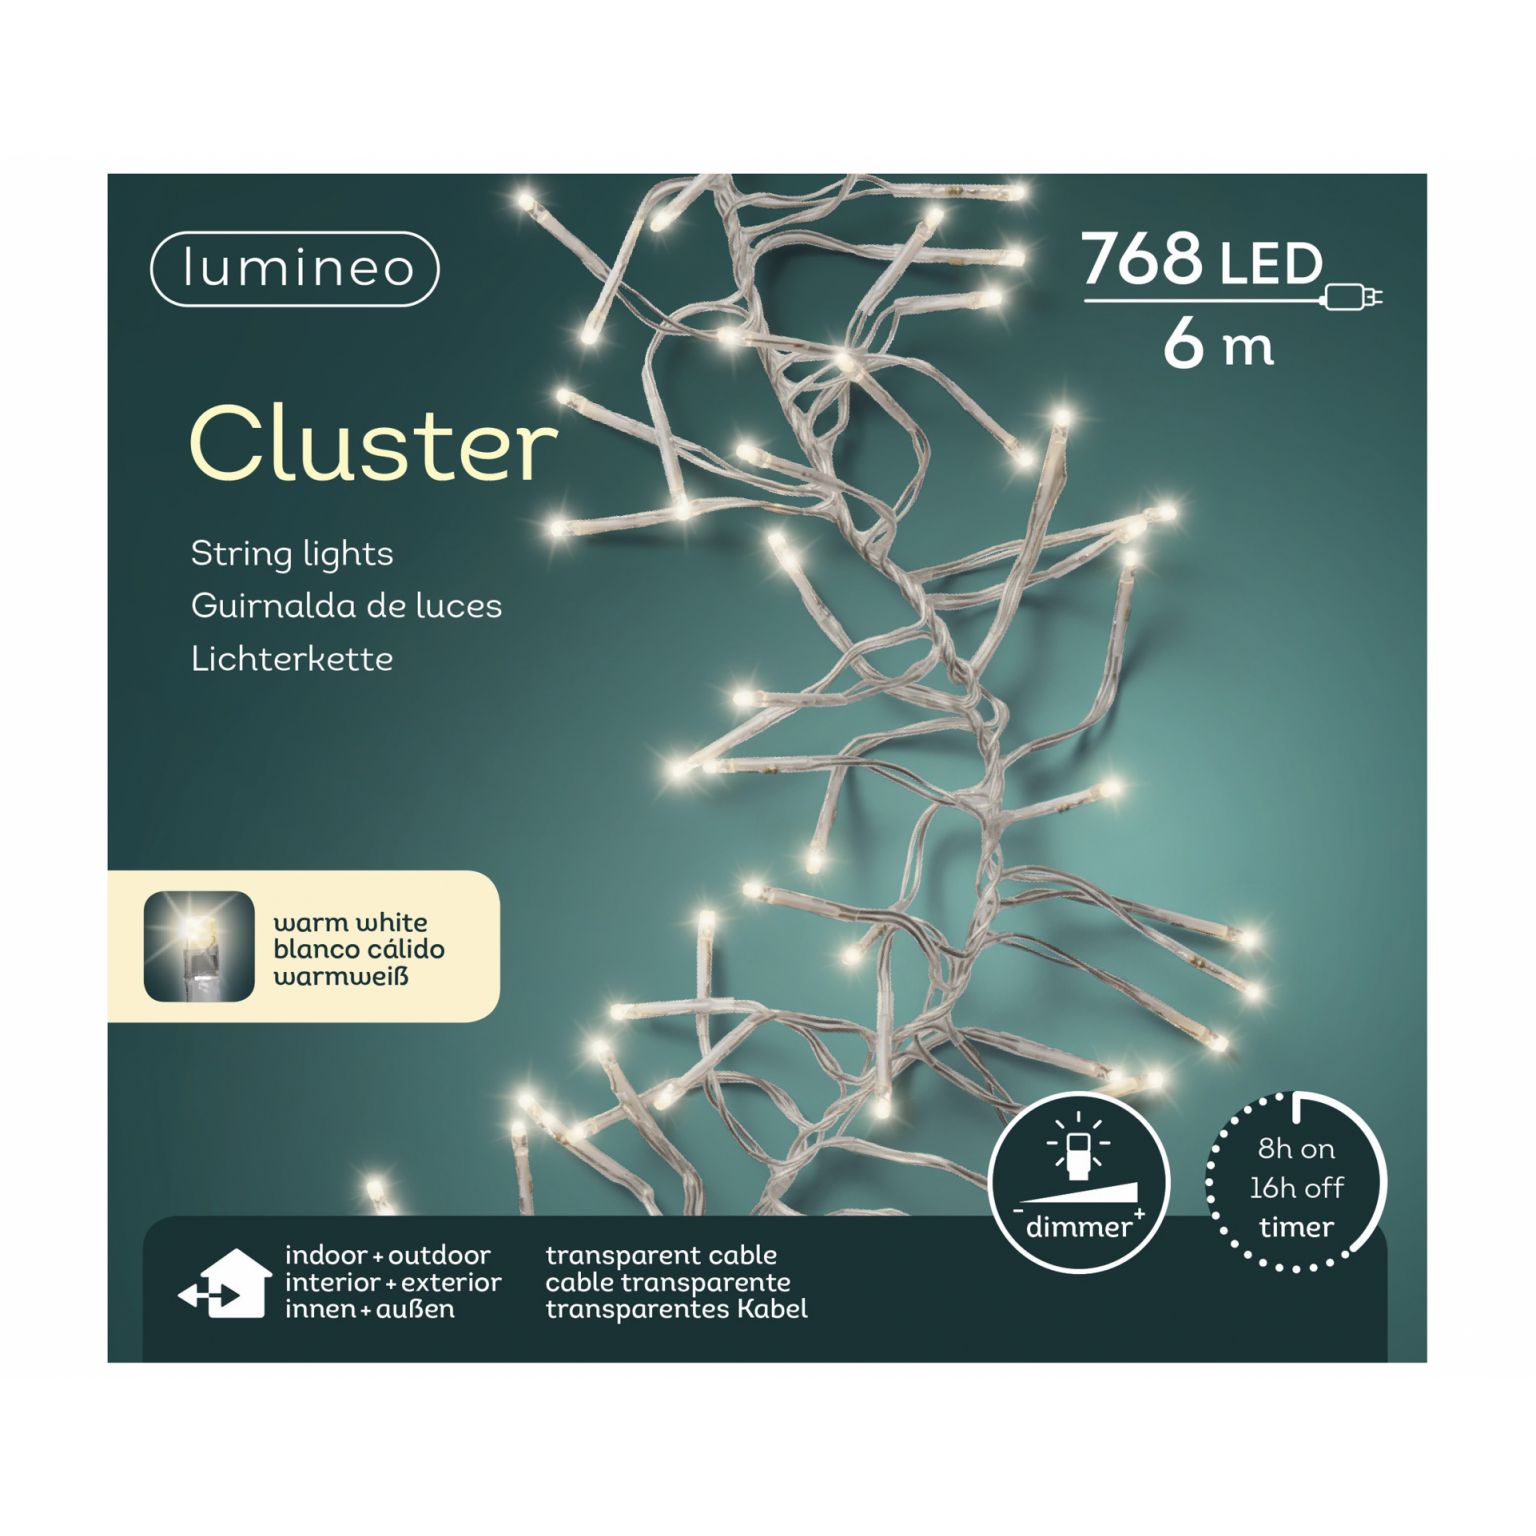 Clusterverlichting lumineo 768-lamps LED 'warm wit ' transparante snoer